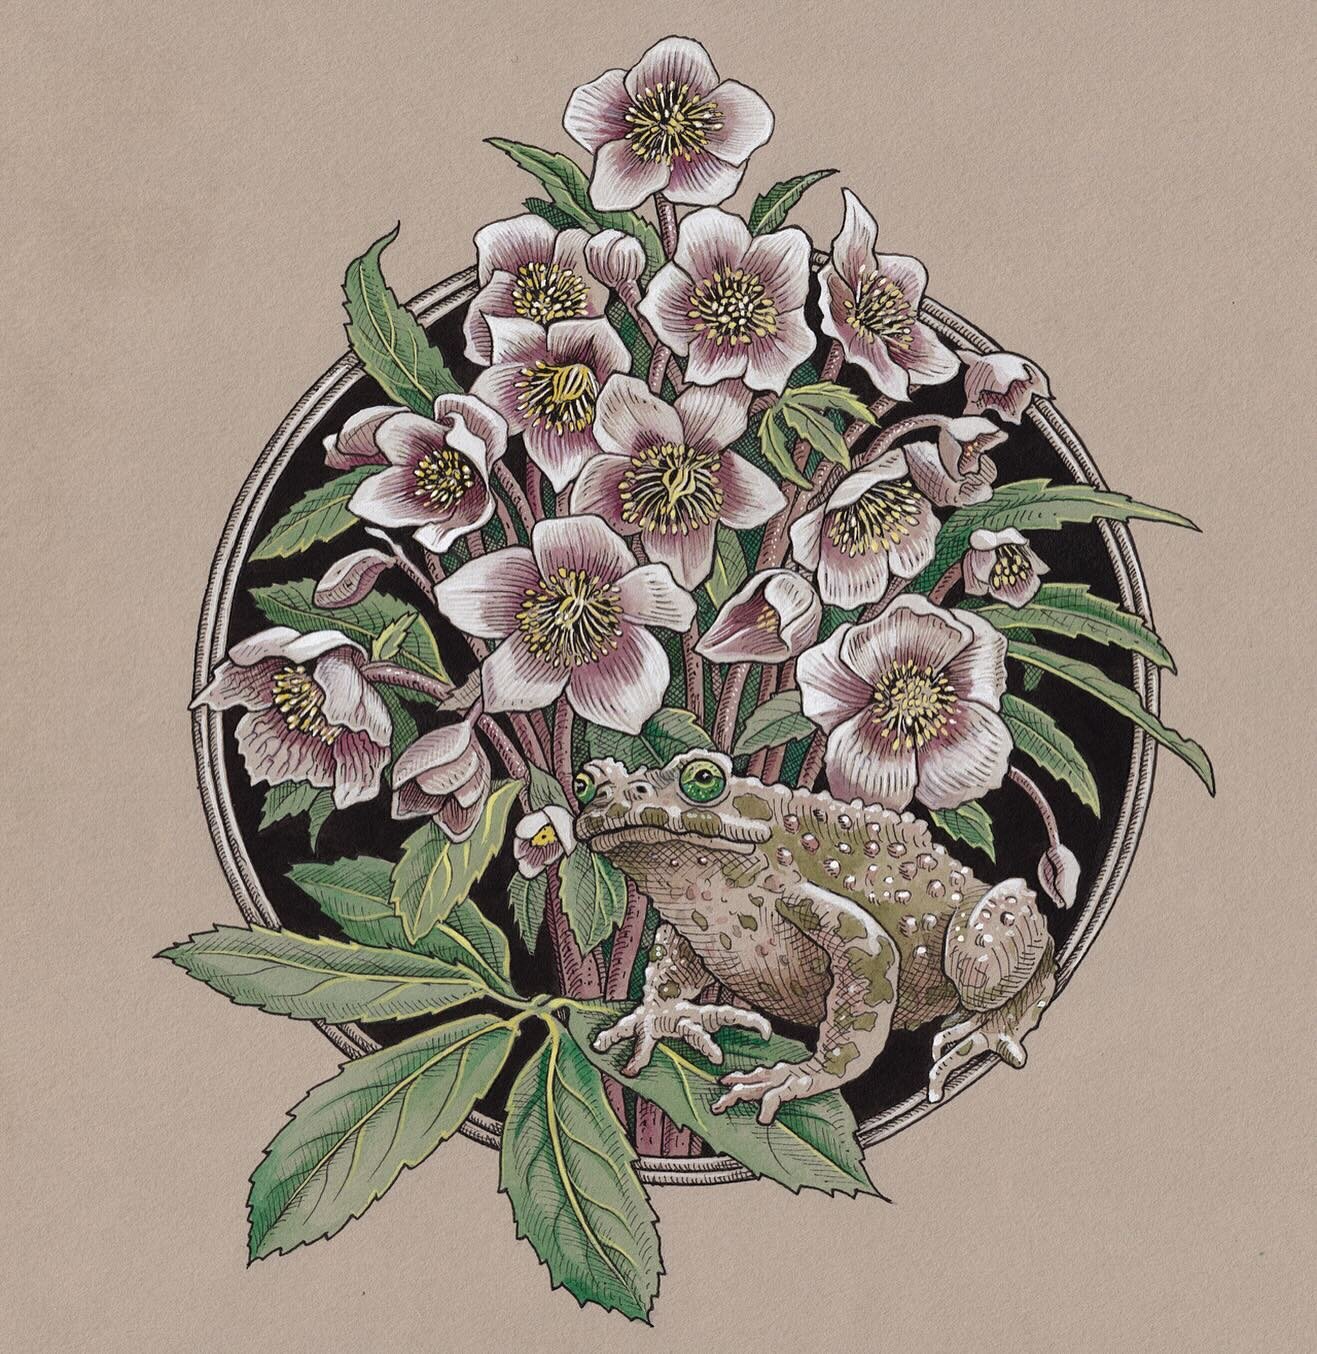 ᛭
Hellebores niger with Bufo bufo
Pen &amp; ink with watercolor and gouache on toned paper. 
9&ldquo;x 12&ldquo;
2016
᛭
Color plate Illustration from the Green Mysteries, by Daniel A Schulke &bull; Published by @threehandspress , 2022
᛭
&lsquo; &hell